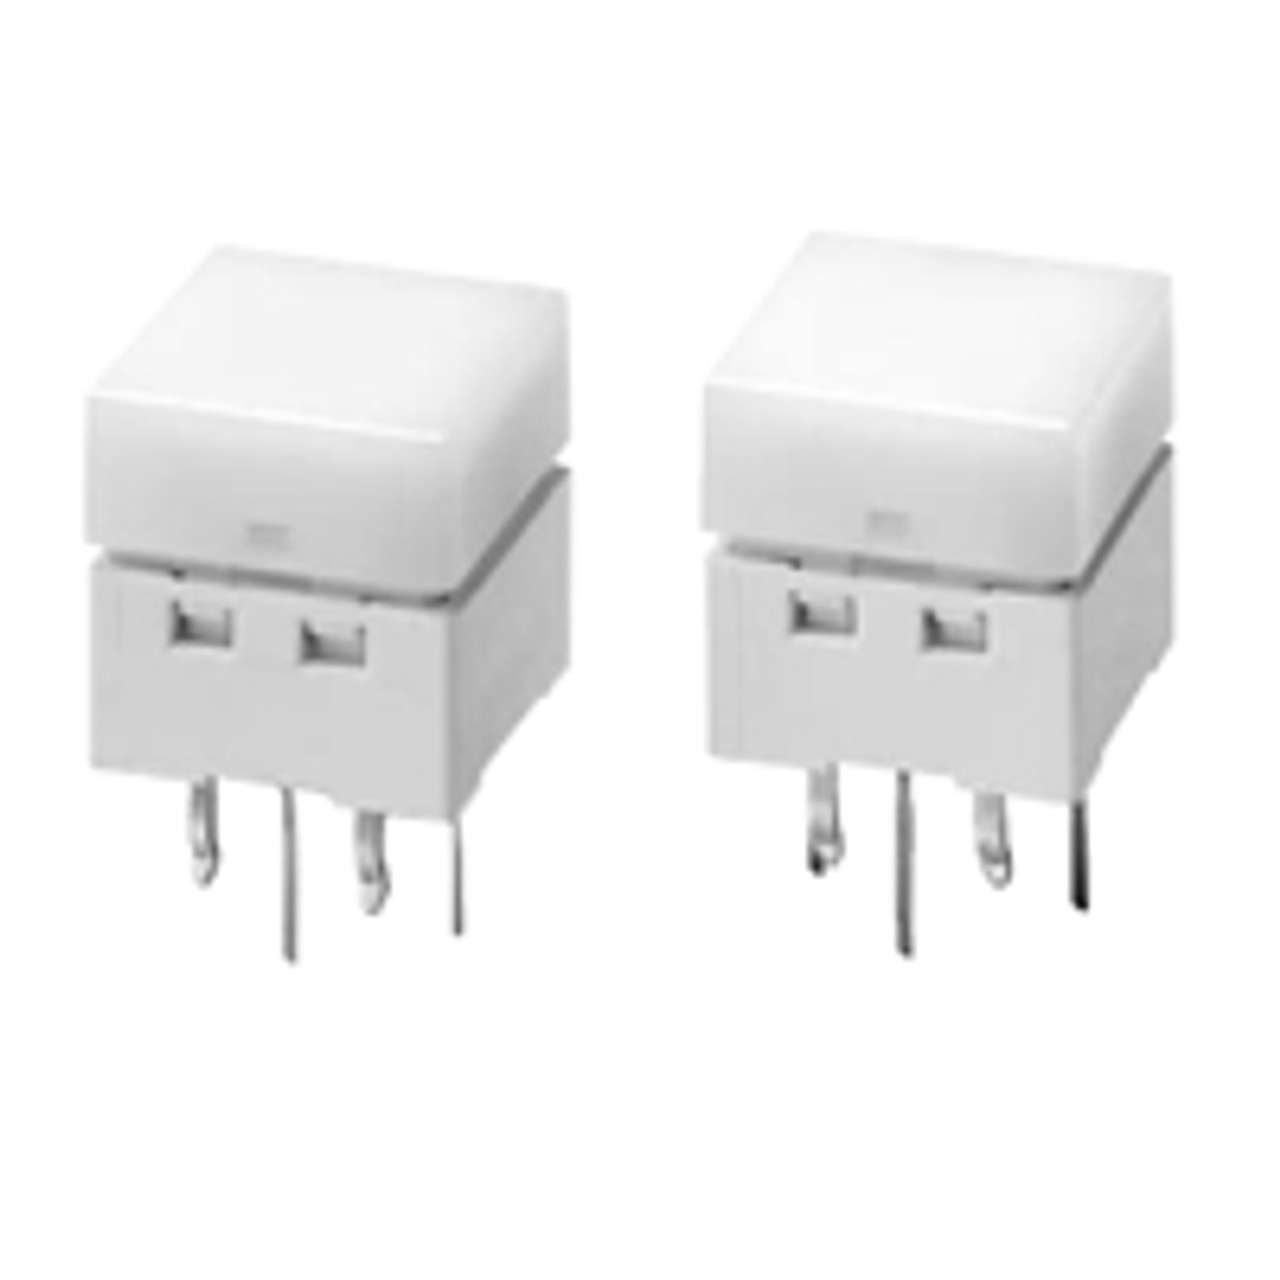 Omron B3W-9010-R2N Tactile Switches